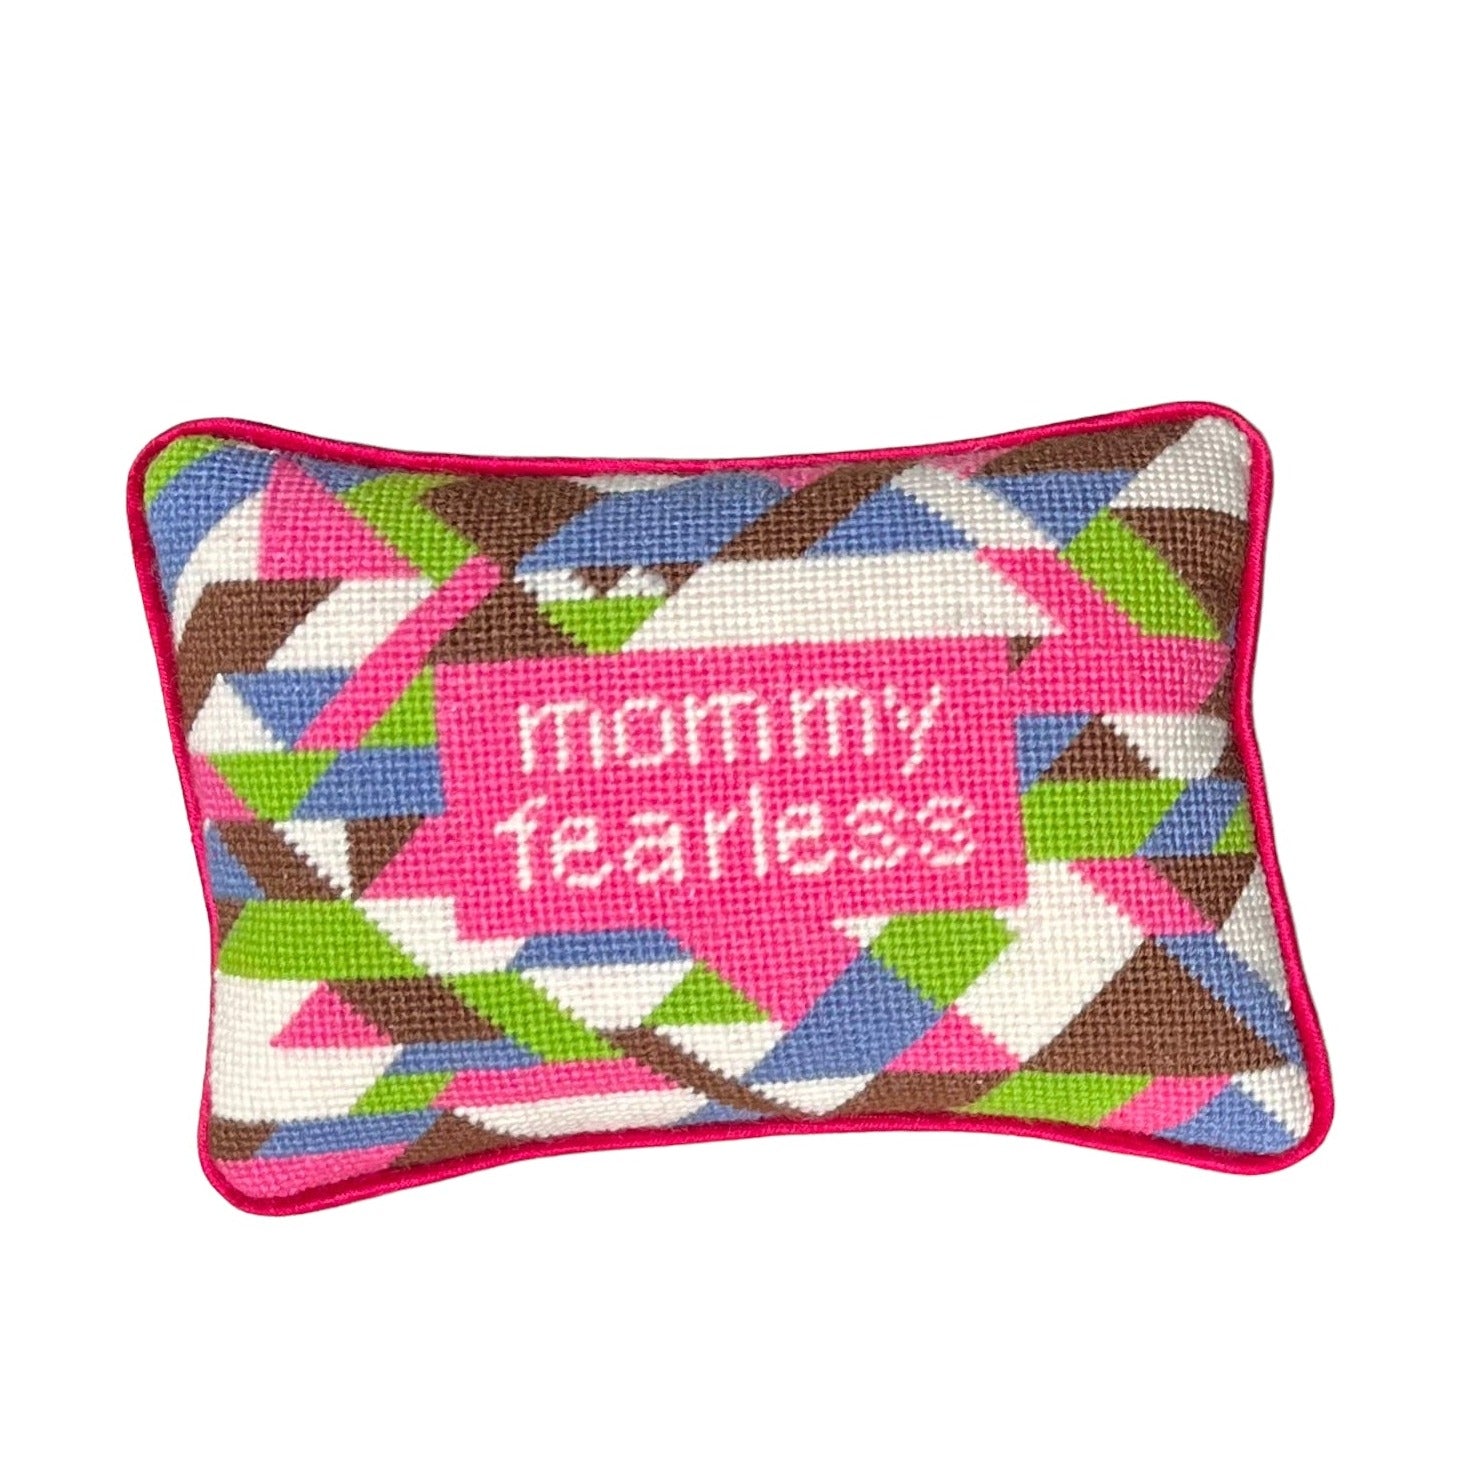 needlepoint MOMMY FEARLESS in hot pink box centered on pillow, surrounded by purple, lime, white & brown geometrics